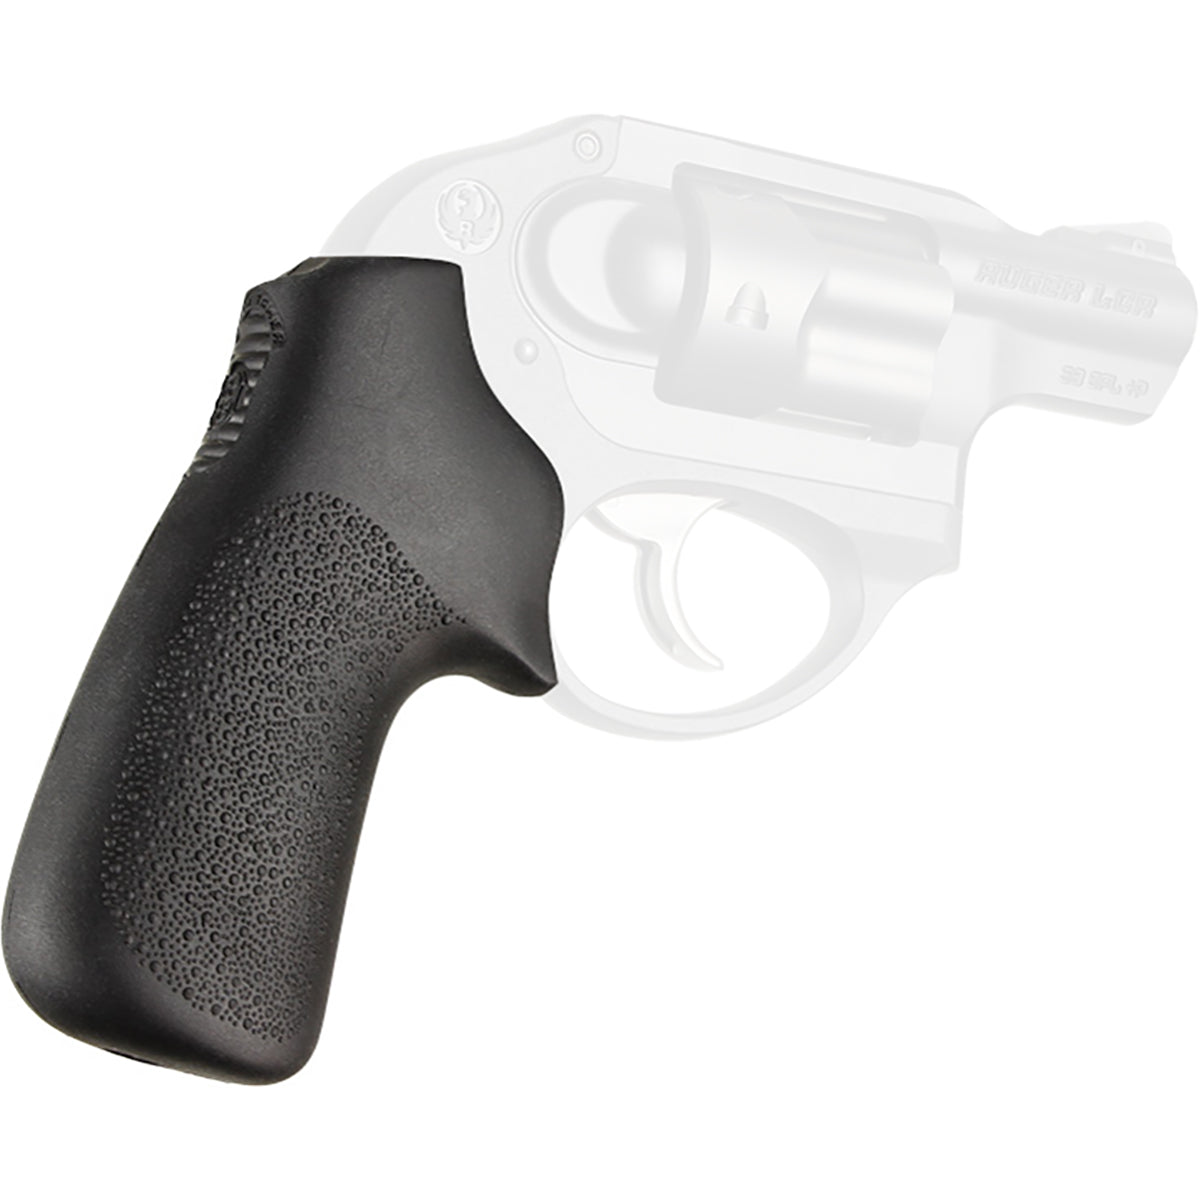 Hogue Ruger LCR/LCRx Rubber Tamer Cushion Grip without Finger Grooves Hogue